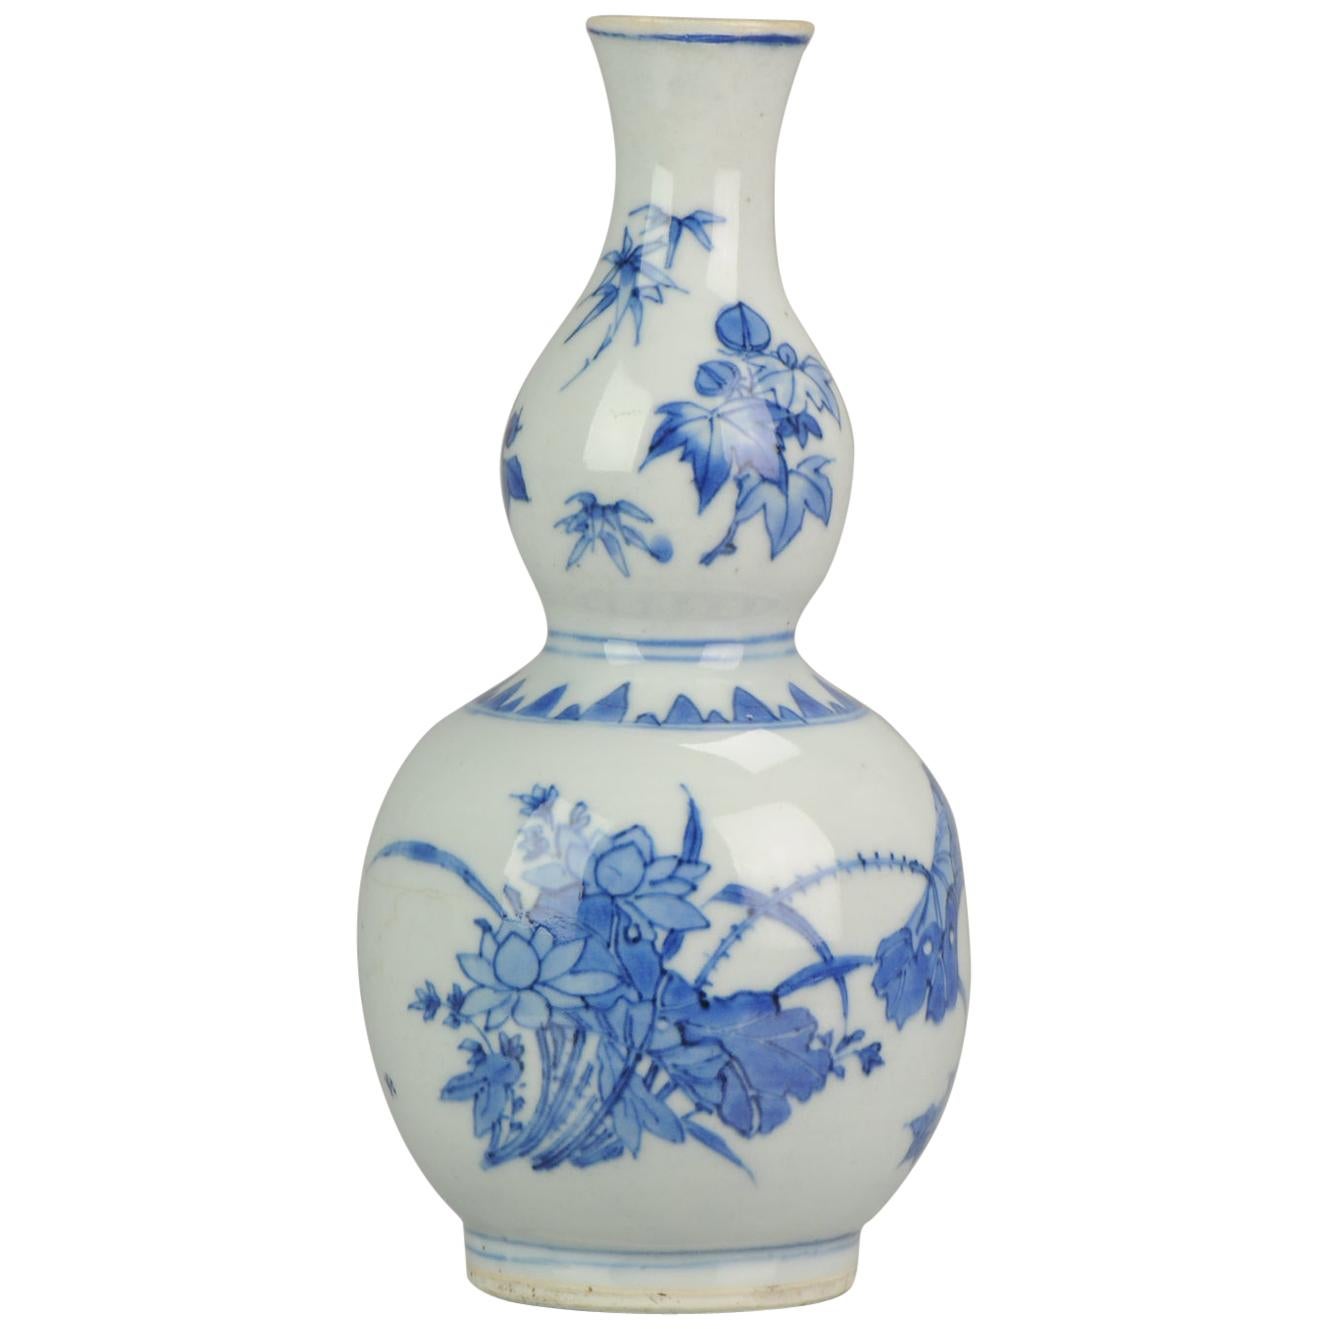 Top Quality Chinese Porcelain 17th C Transitional Double Gourd Vase, China